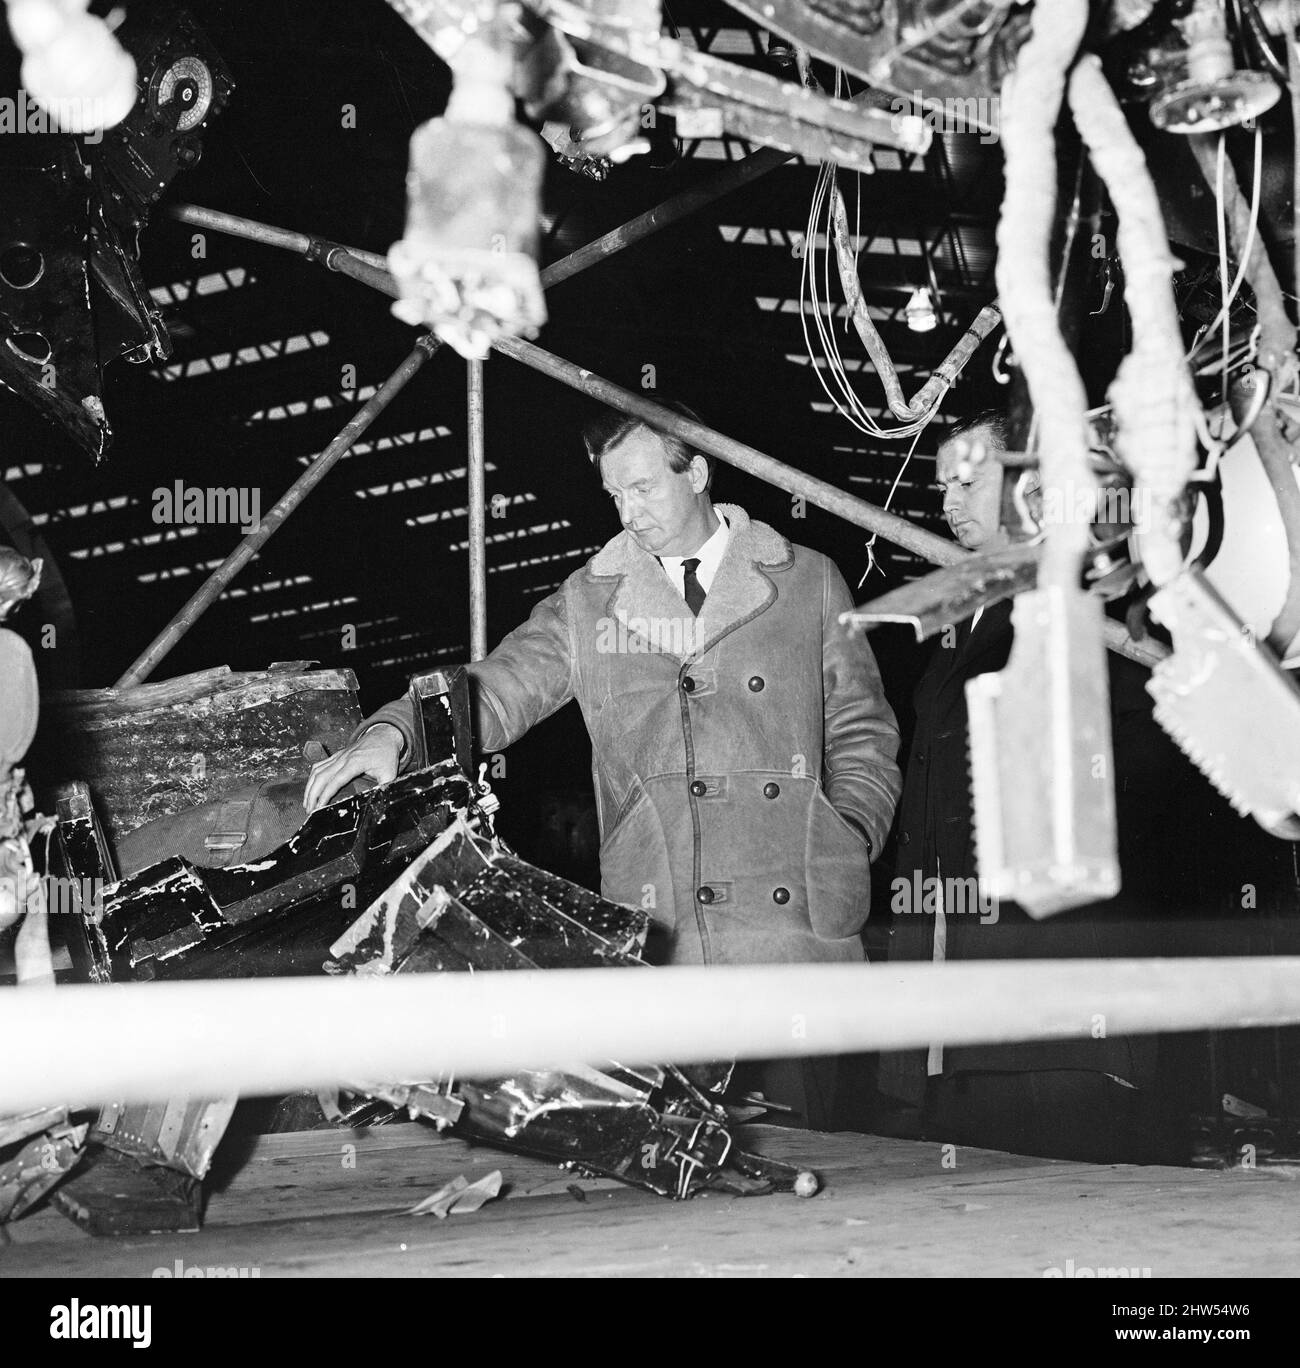 Captain Harry Marlow, inspects the wreckage of his British Midland plane, now at Farnborough Aerodrome.Captain Marlow Survived the Stockport air crash of 4th June 1967  The Stockport air disaster was the crash of a Canadair C-4 Argonaut aircraft owned by British Midland Airways, registration G-ALHG,[1] in a small open area at Hopes Carr near the centre of Stockport, Cheshire, England on Sunday 4 June 1967. 72 of the 84 aboard were killed in the accident. Of the 12 survivors, all were seriously injured. It currently stands as the fourth worst disaster in British aviation history, and the third Stock Photo